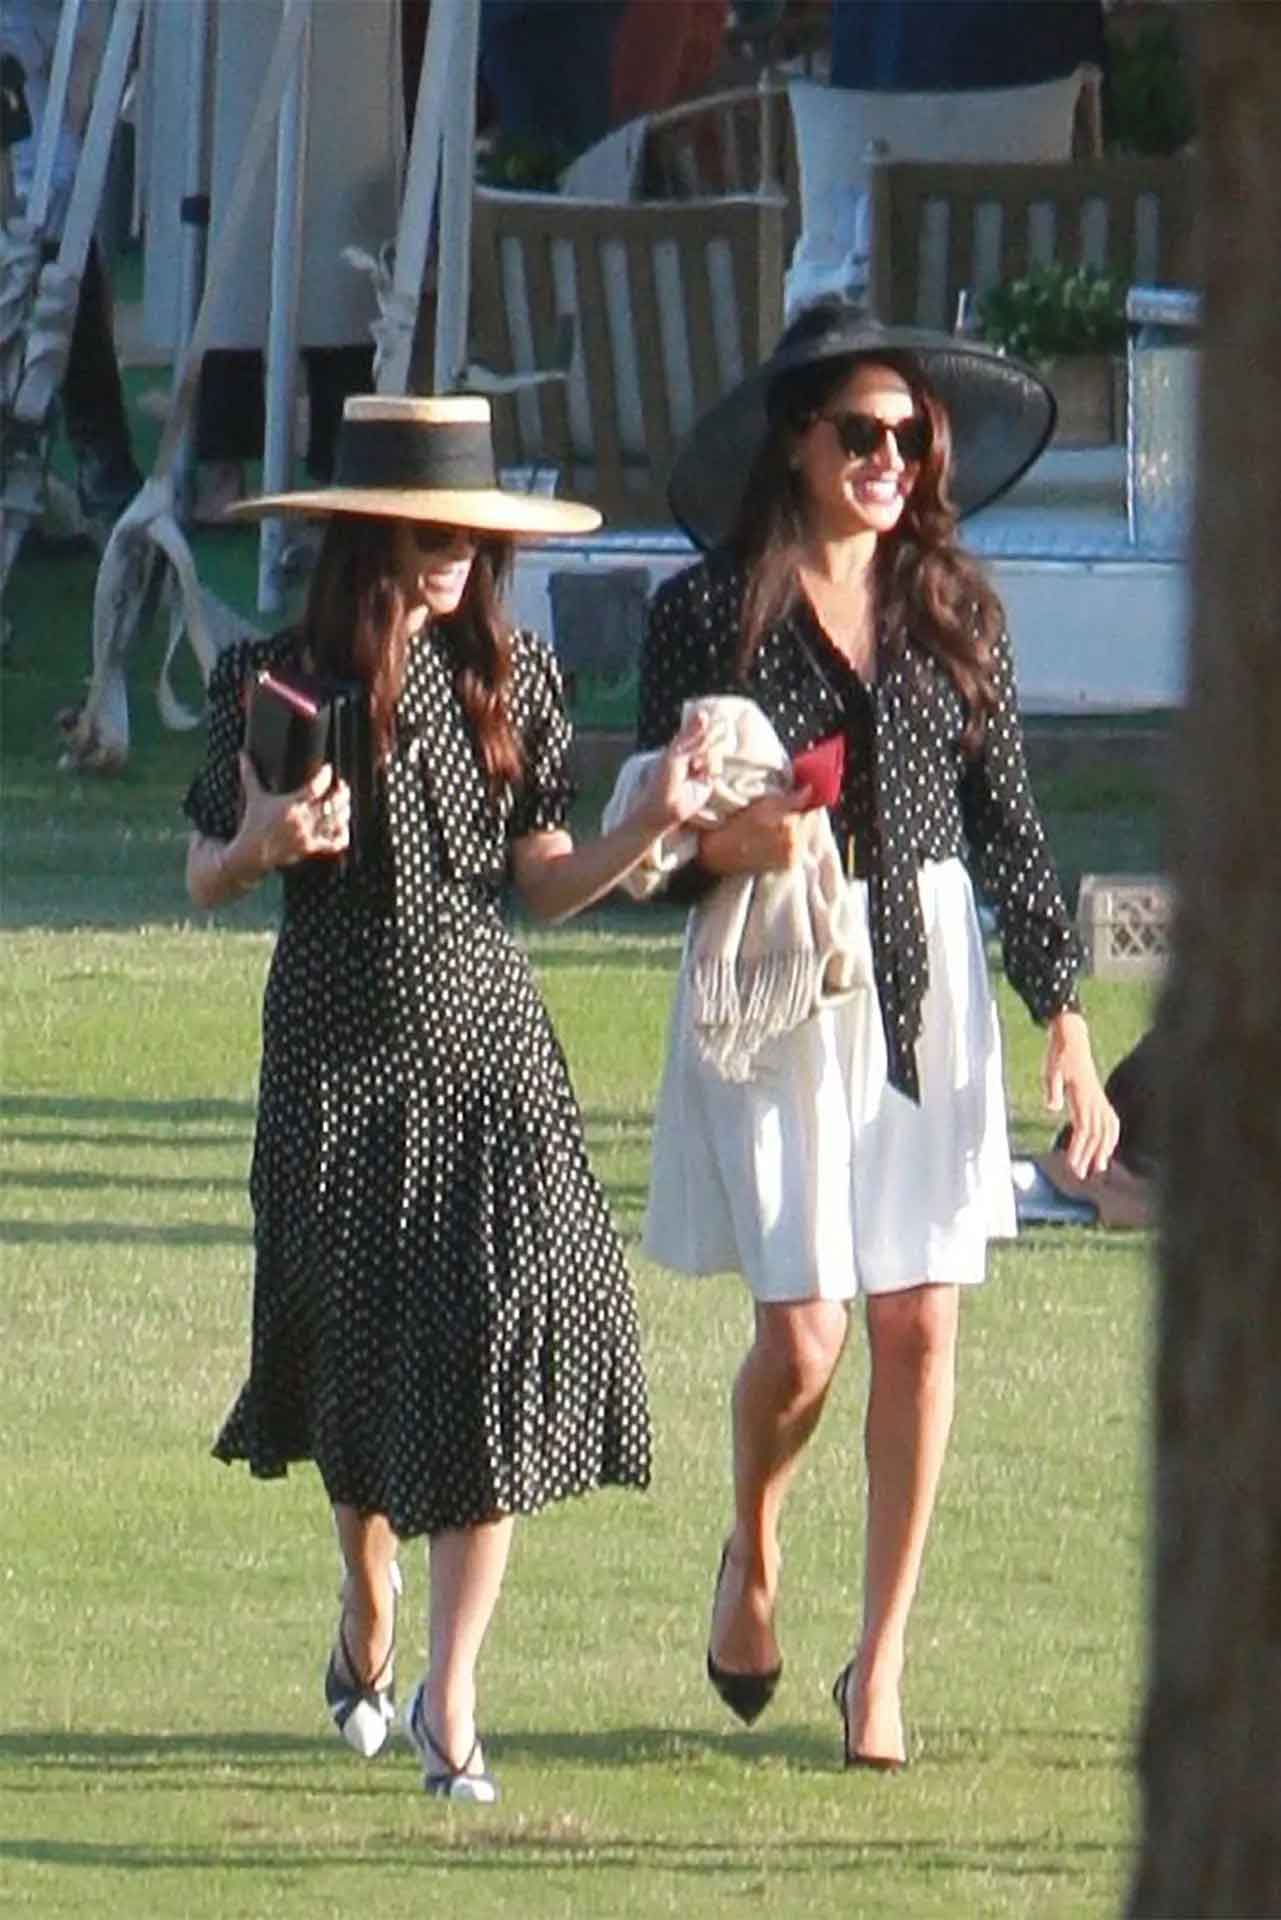 Meghan Markle steals Prince Harry’s show with her stunning appearance at polo match: Photos